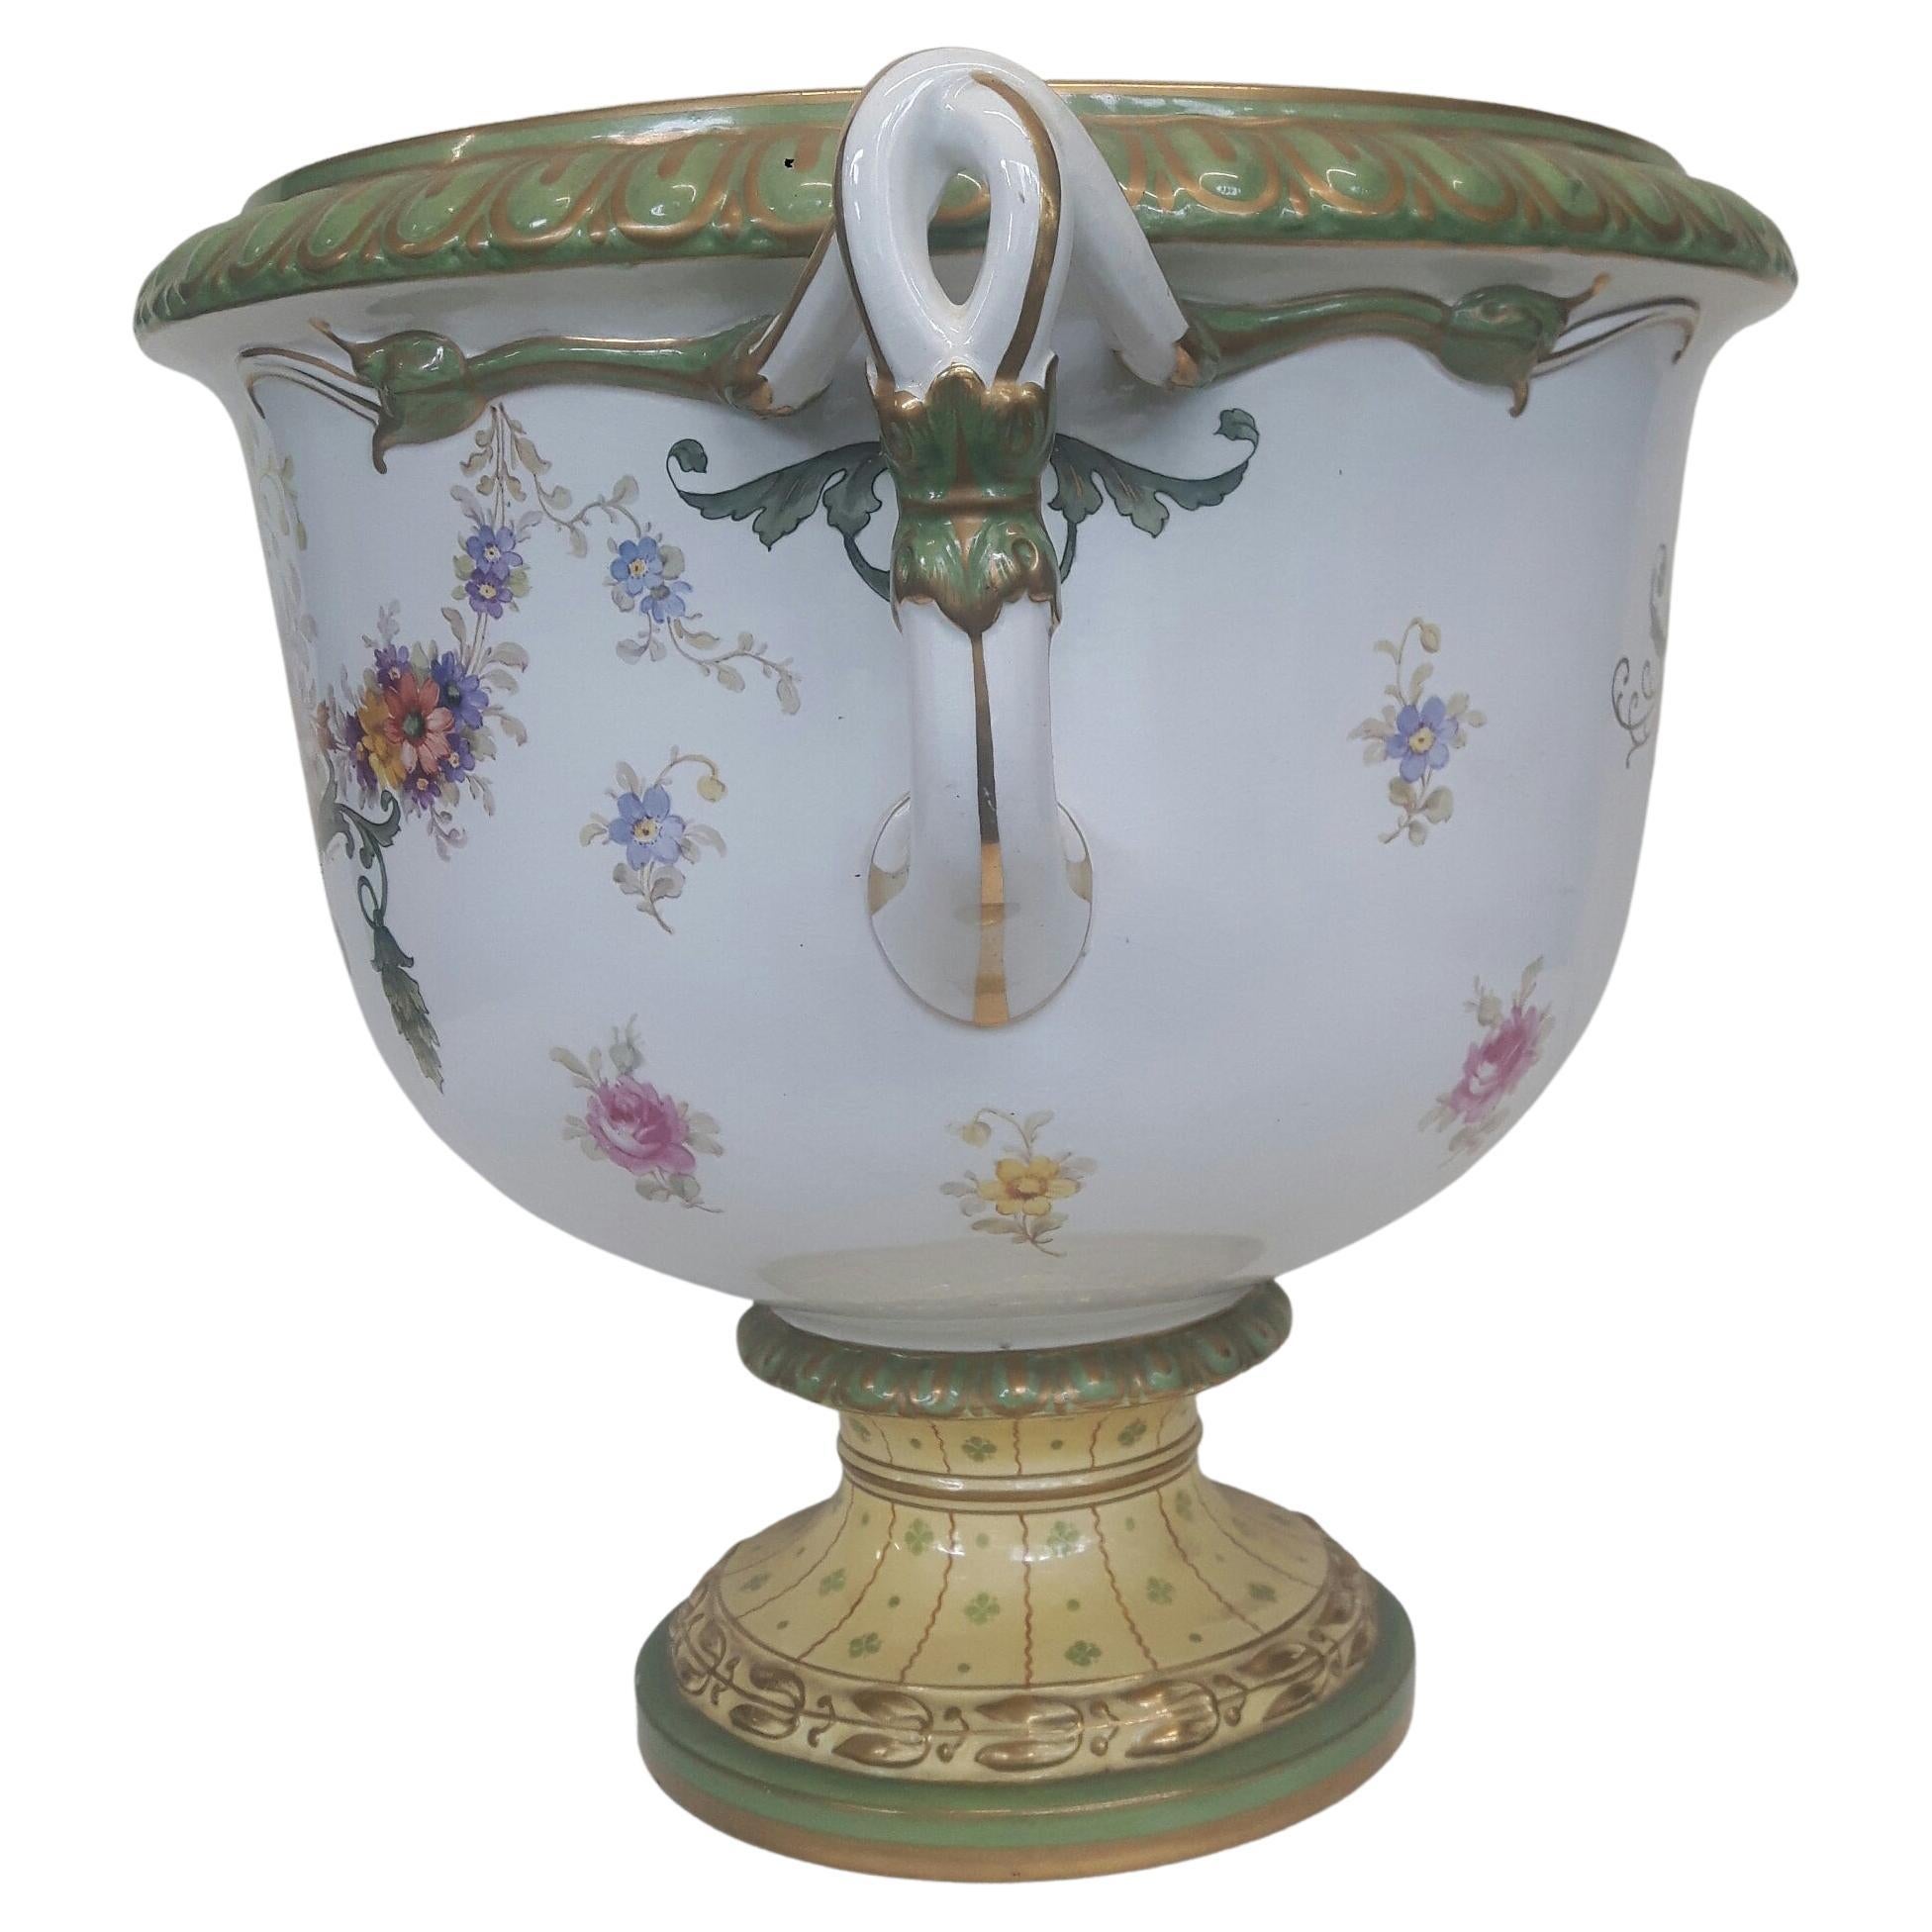 A very large two-handled Royal Bonne Jadiner, delicately painted with elaborate bouquets of flowers, reverse painted with scrolling leaf design on a circular base.